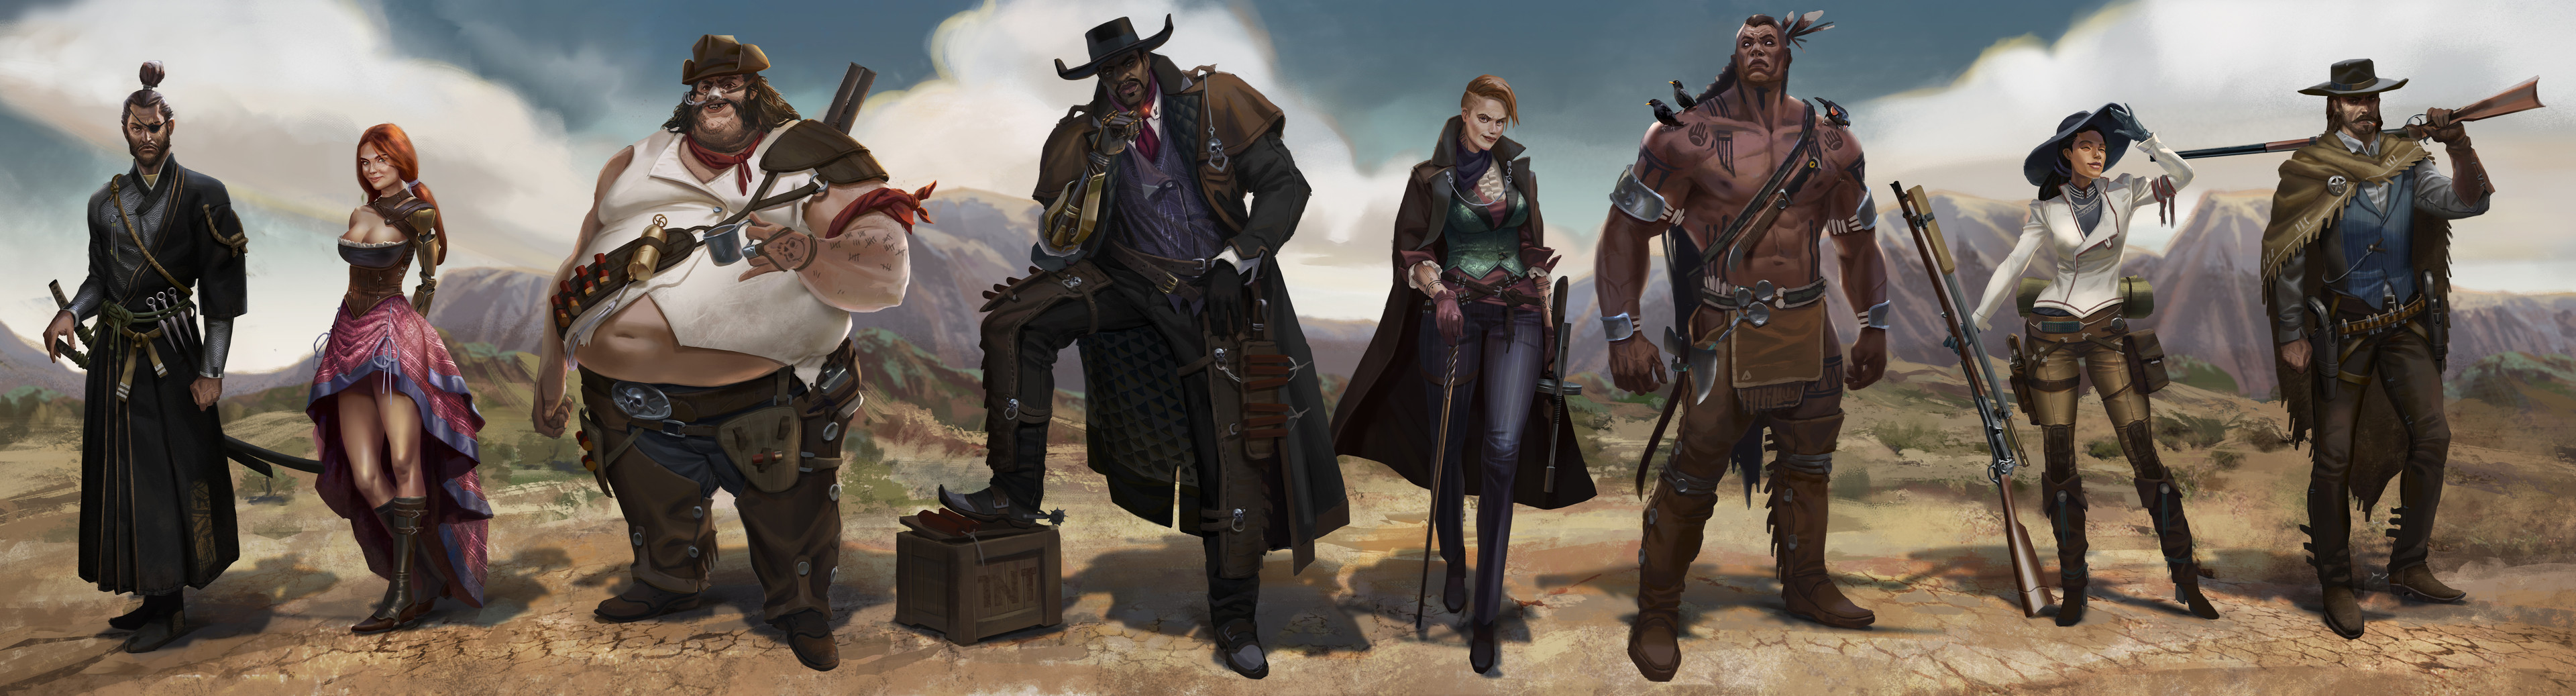 Play force wild west full